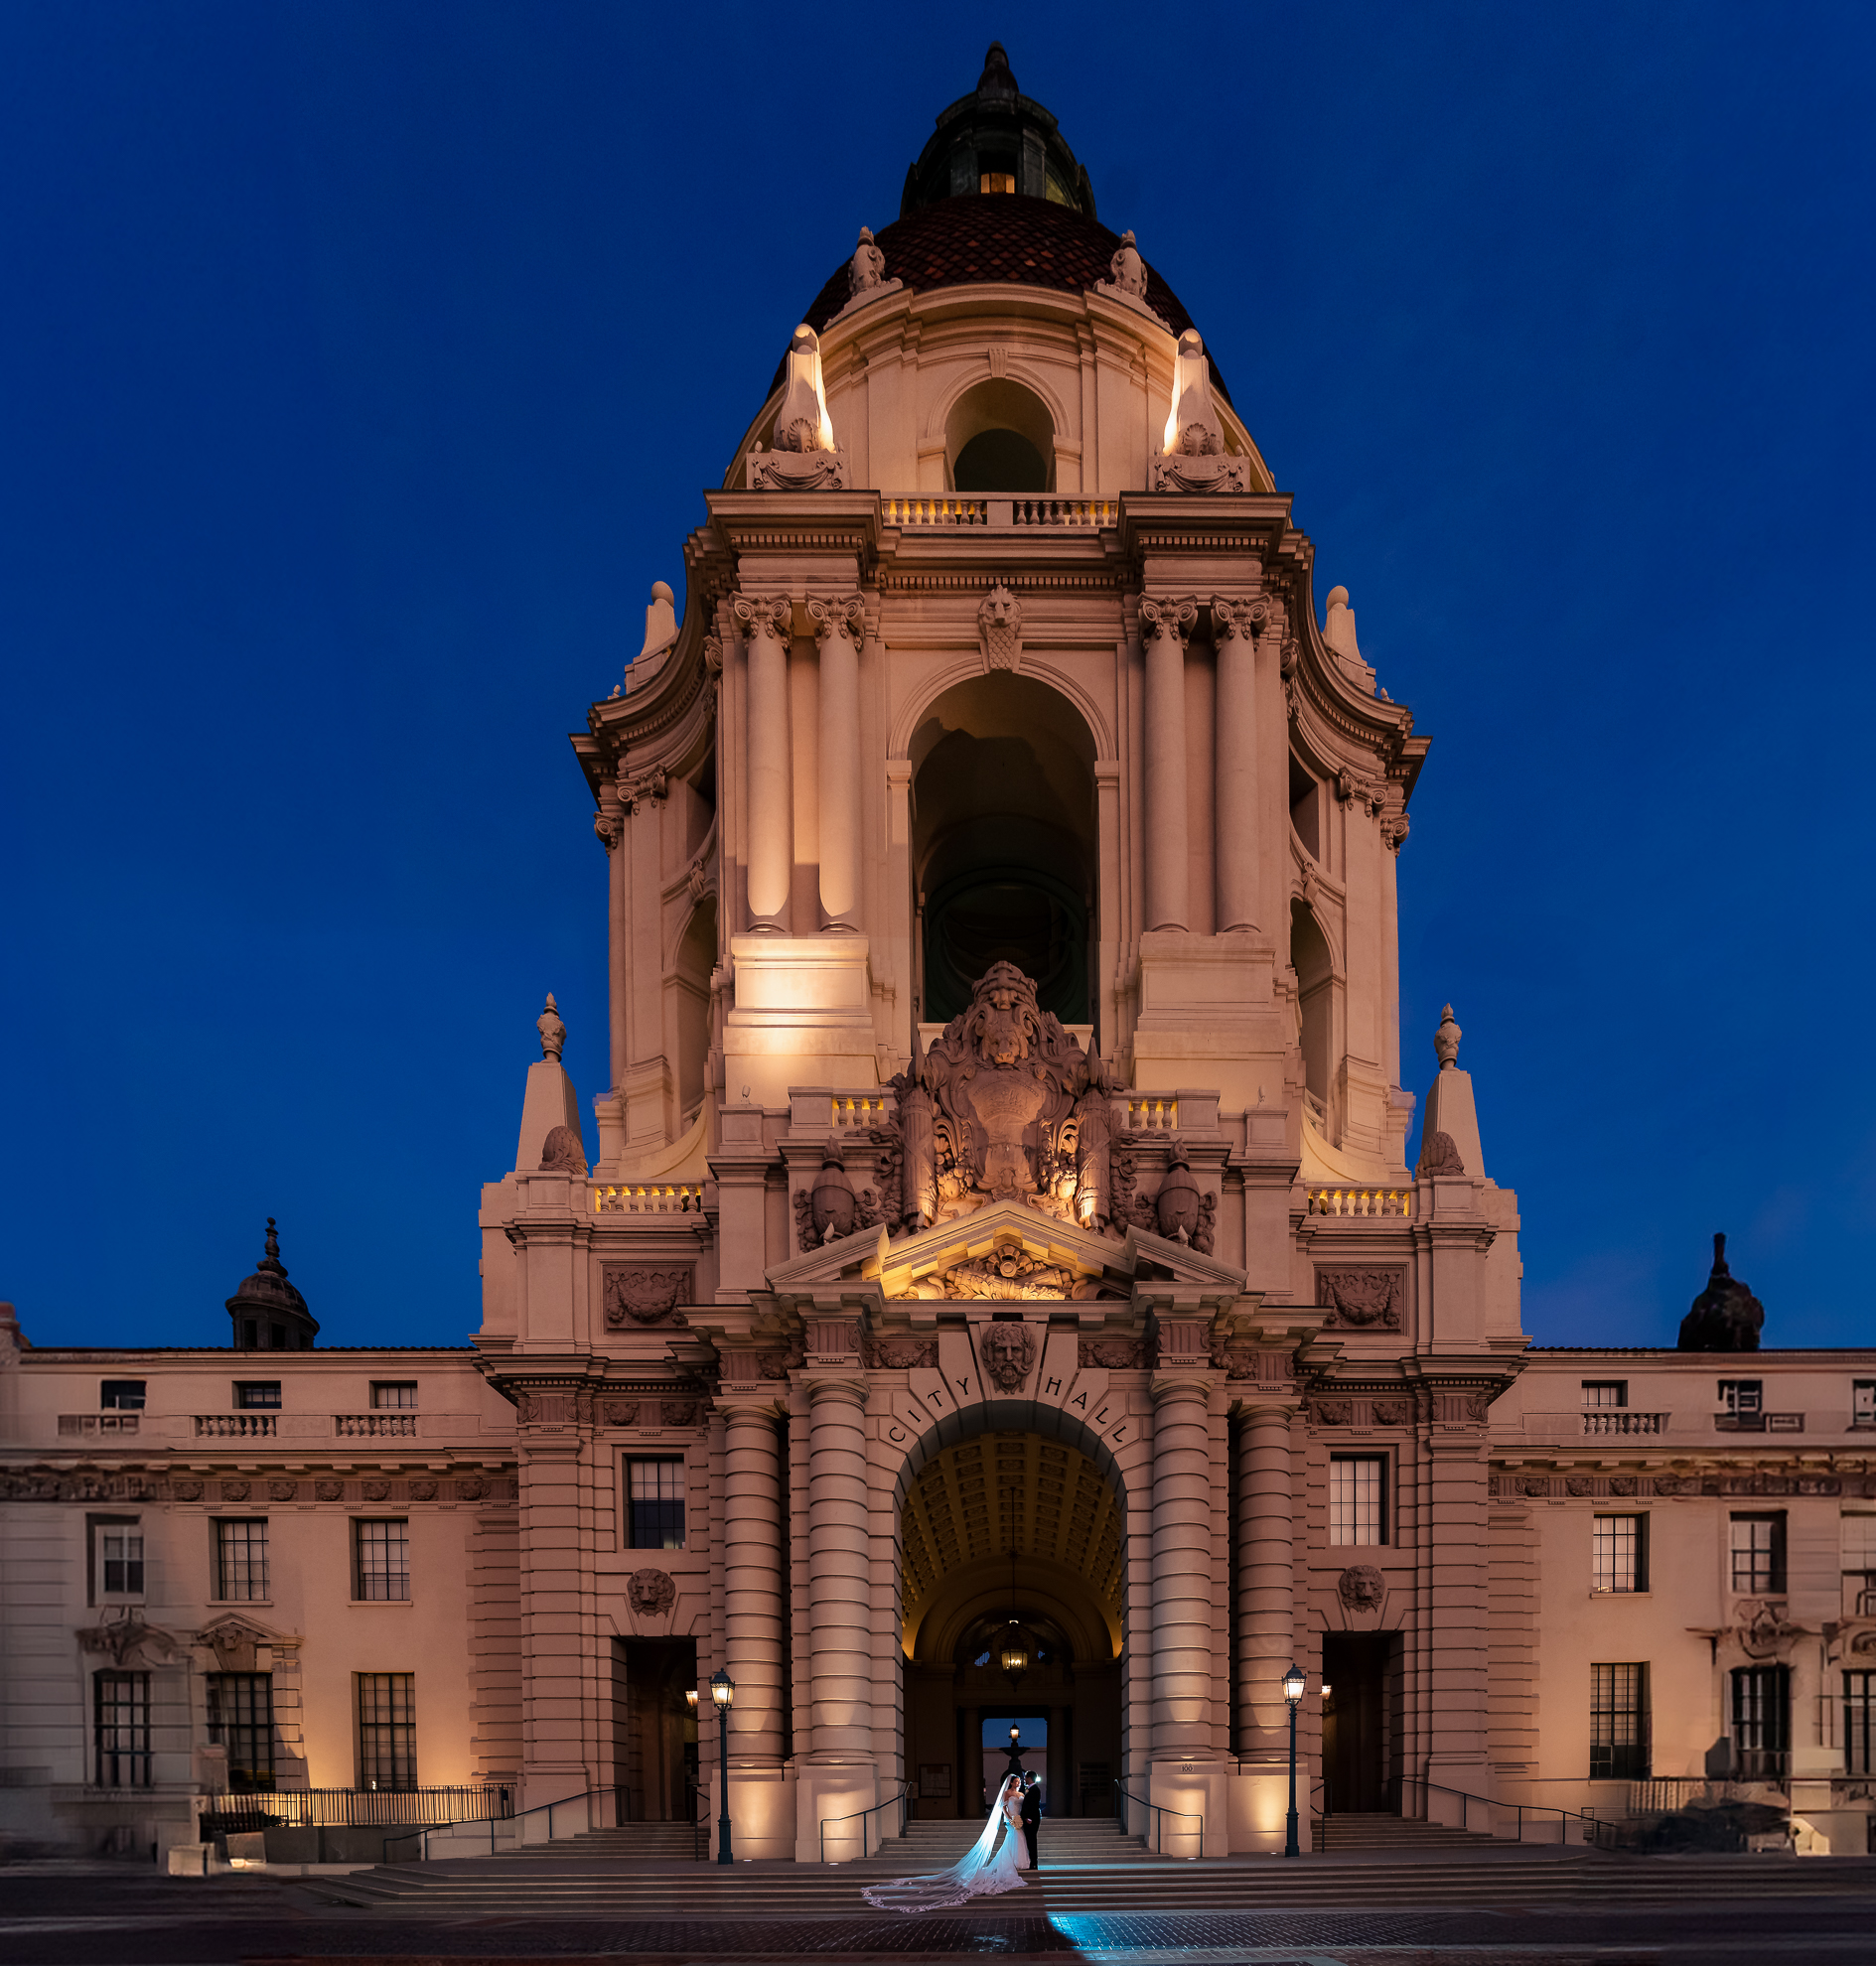 ThomasKim Photography Los Angeles Wedding Photographer M & M, a bride and groom standing in front of an ornate building at night.